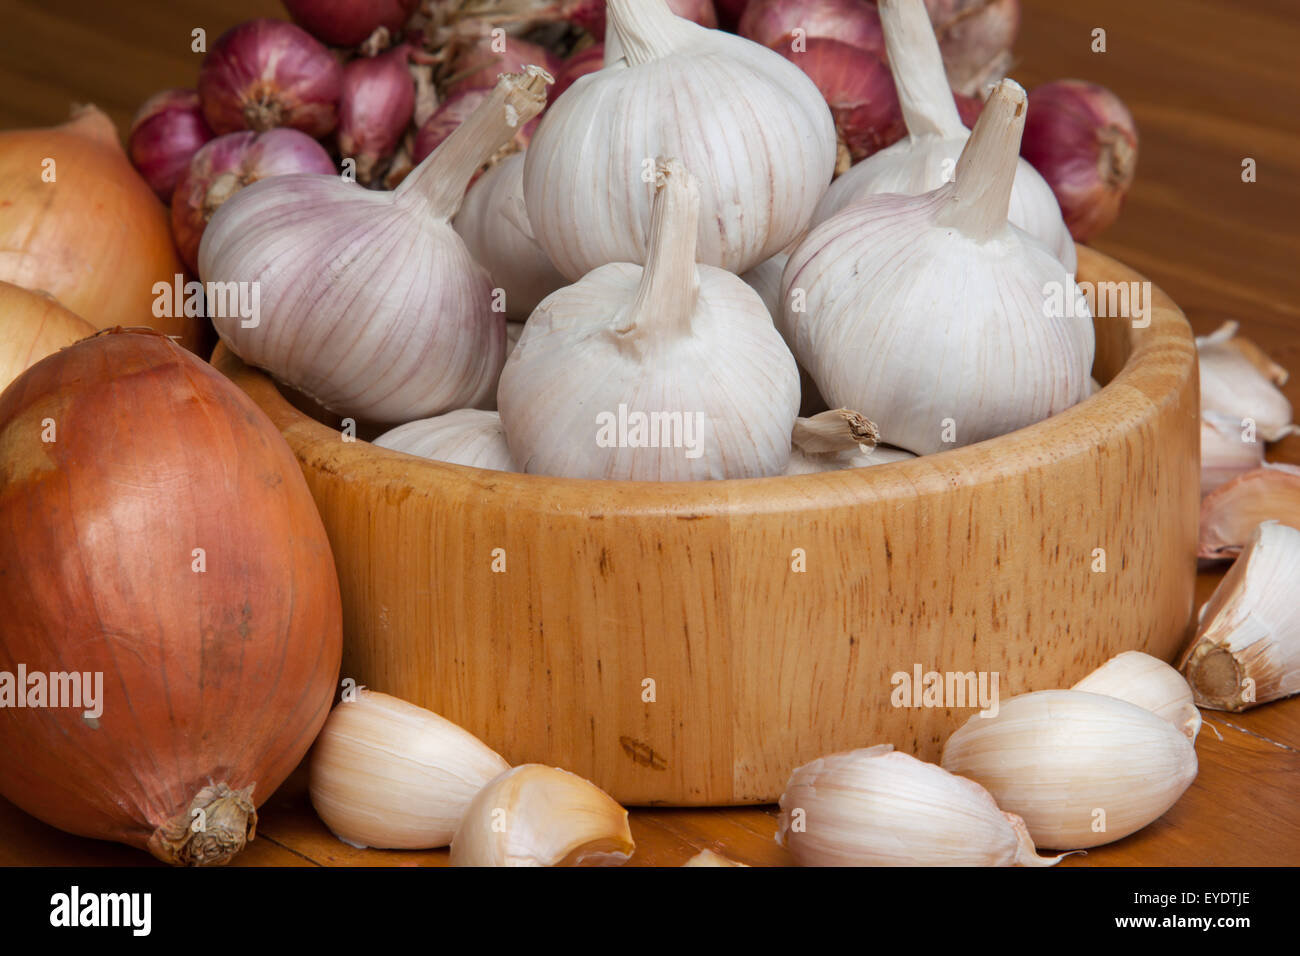 Shallot Stock Photos and Images - 123RF